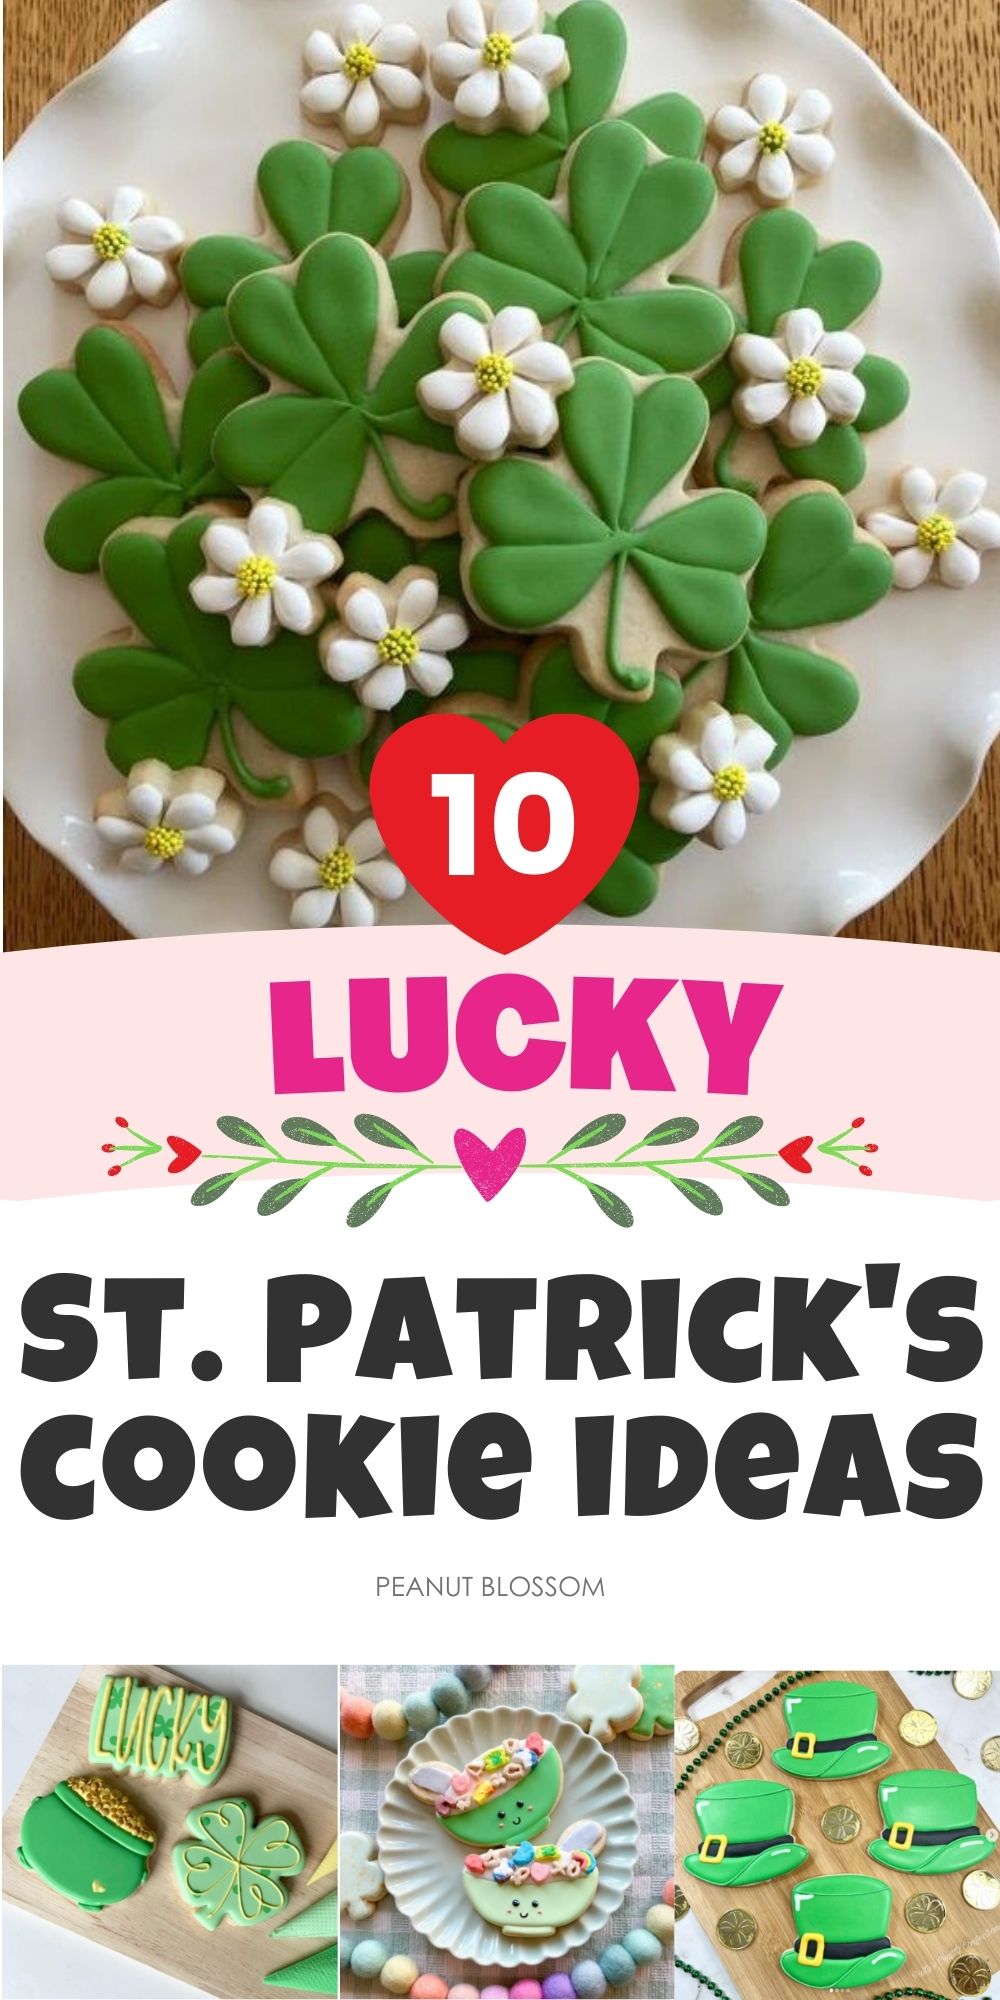 A photo collage shows a variety of adorable but easy green and white St. Patrick's Day cookie decorating ideas.